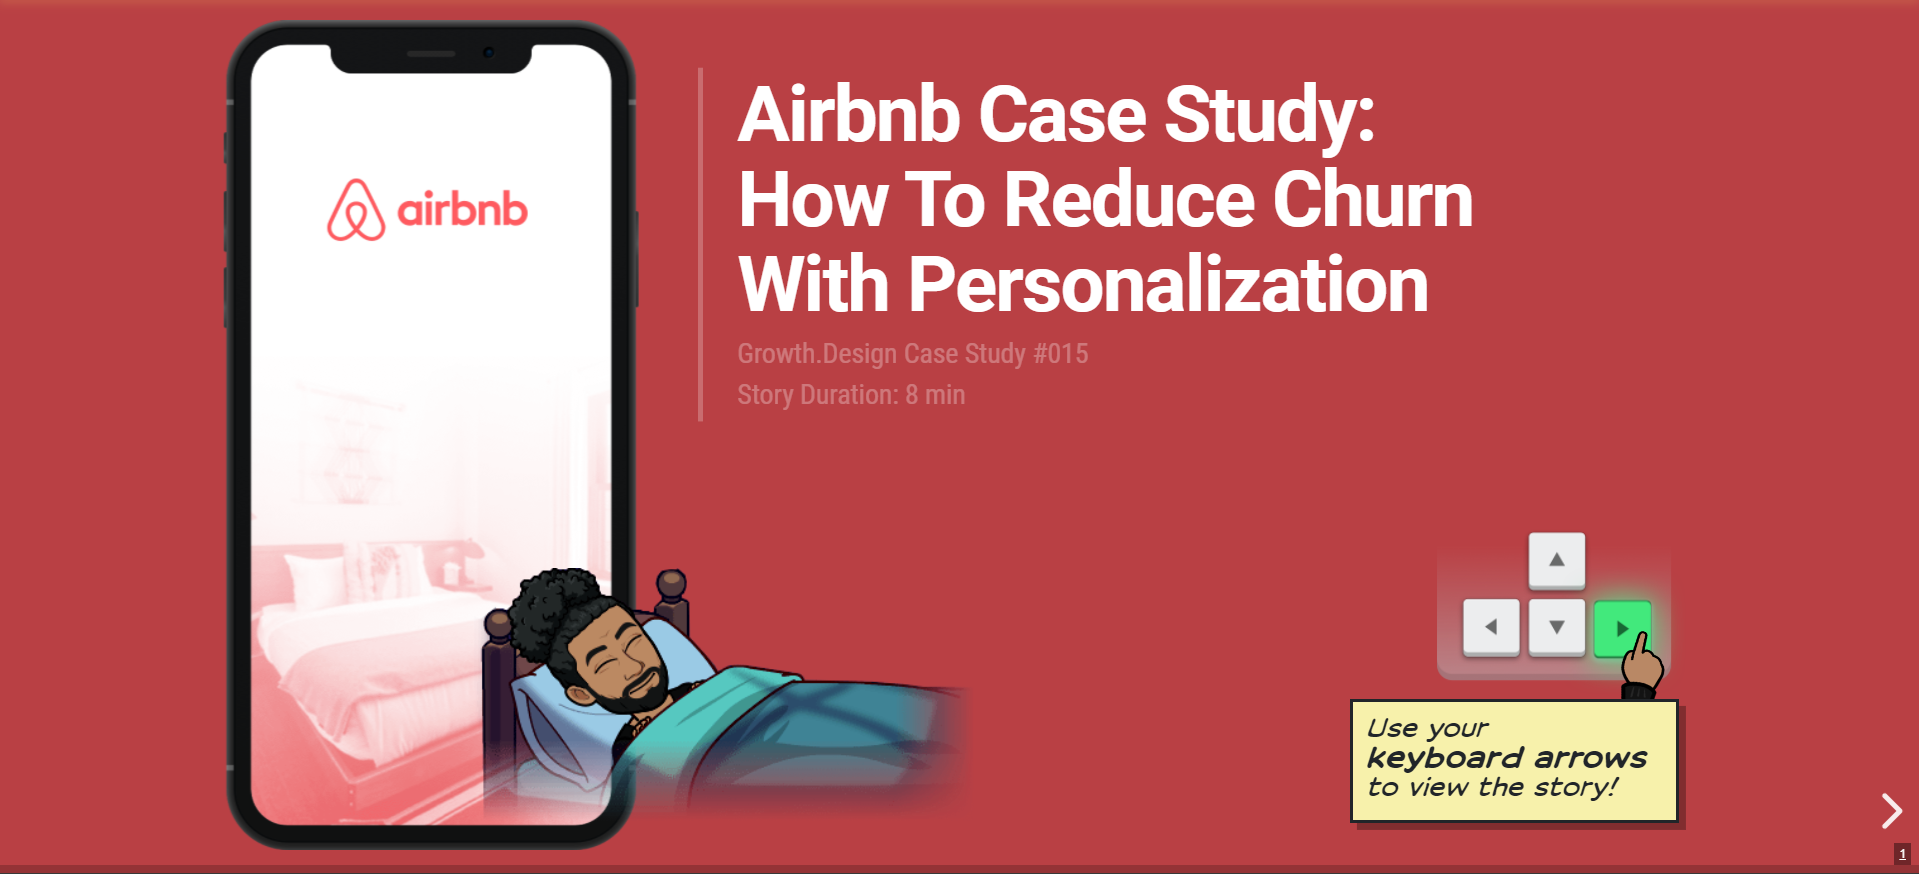 Growth.Design's airbnb case study